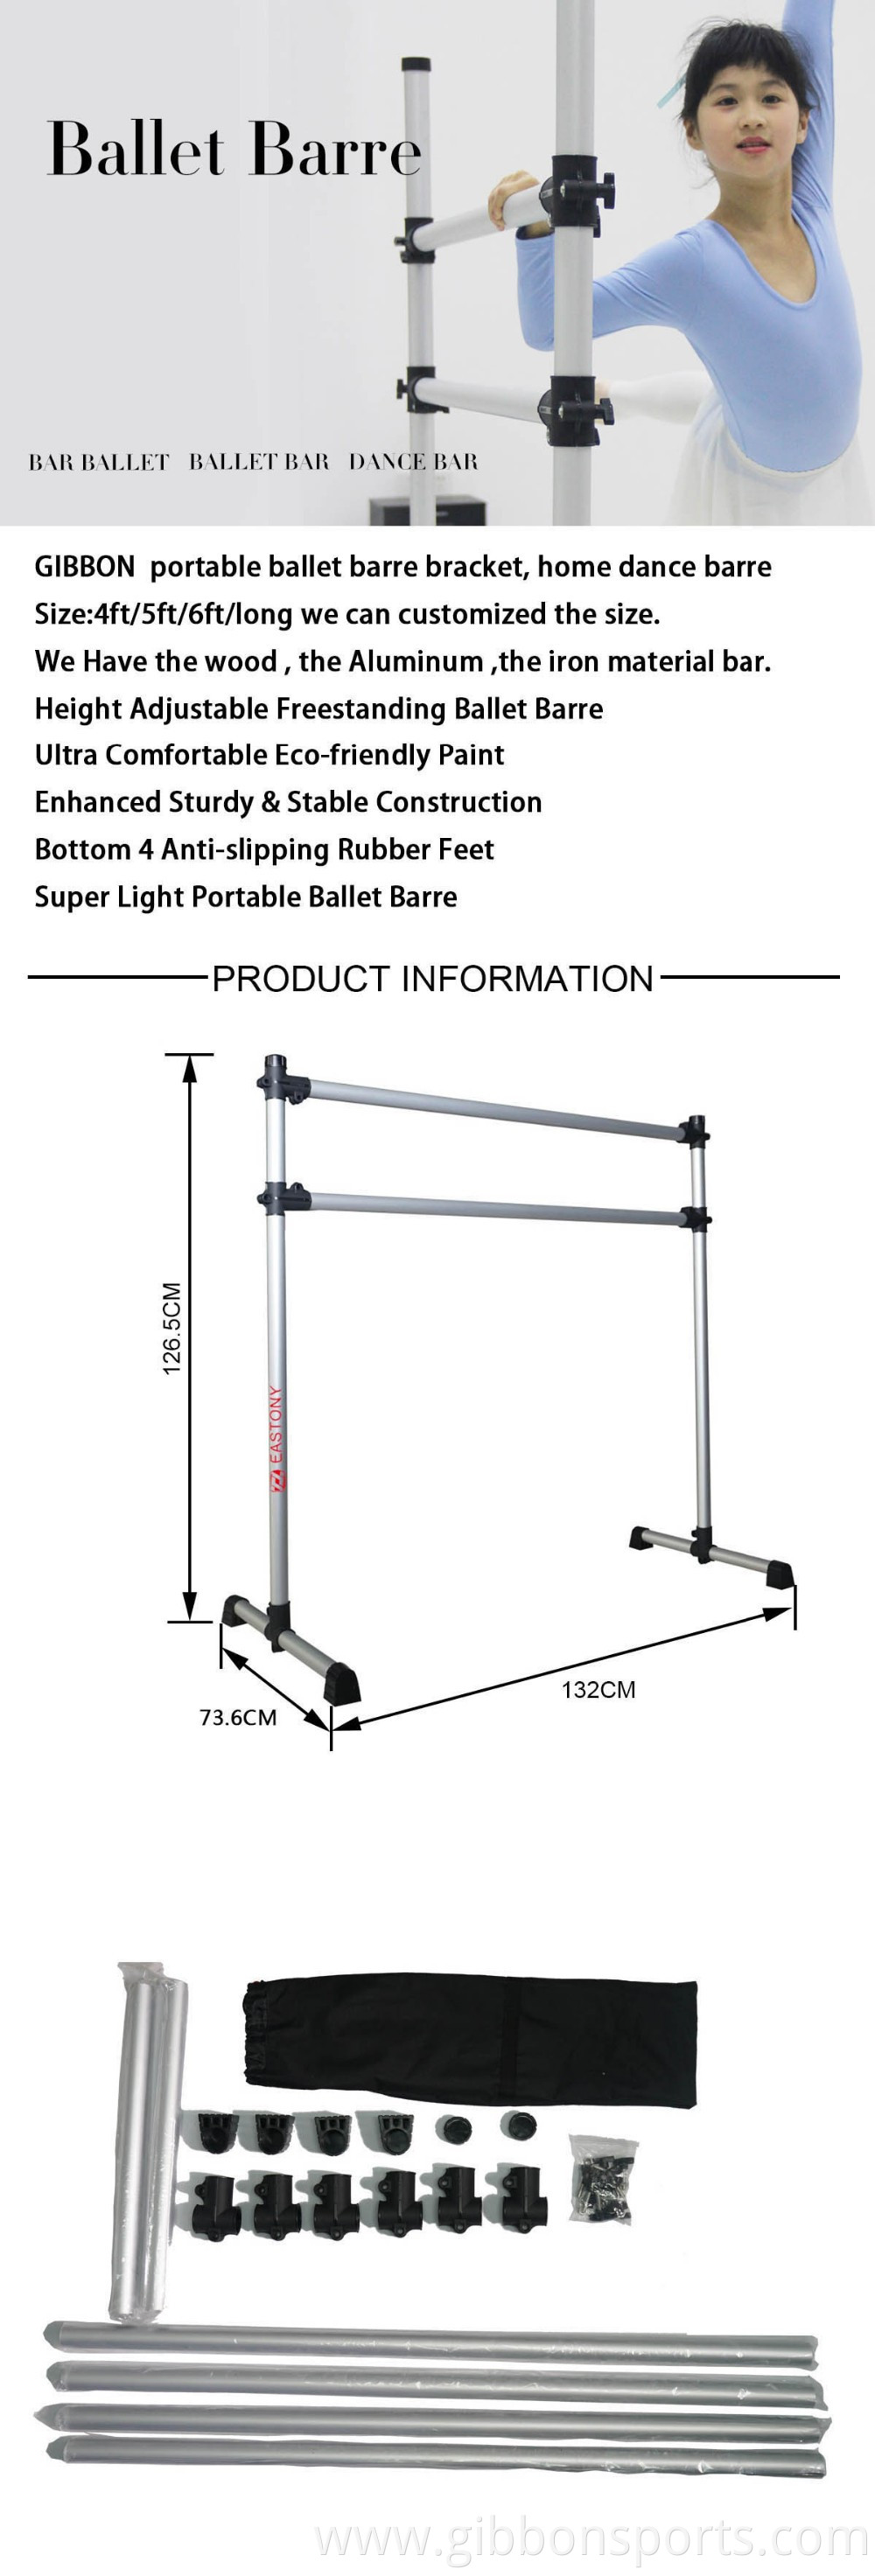 ballet barre product